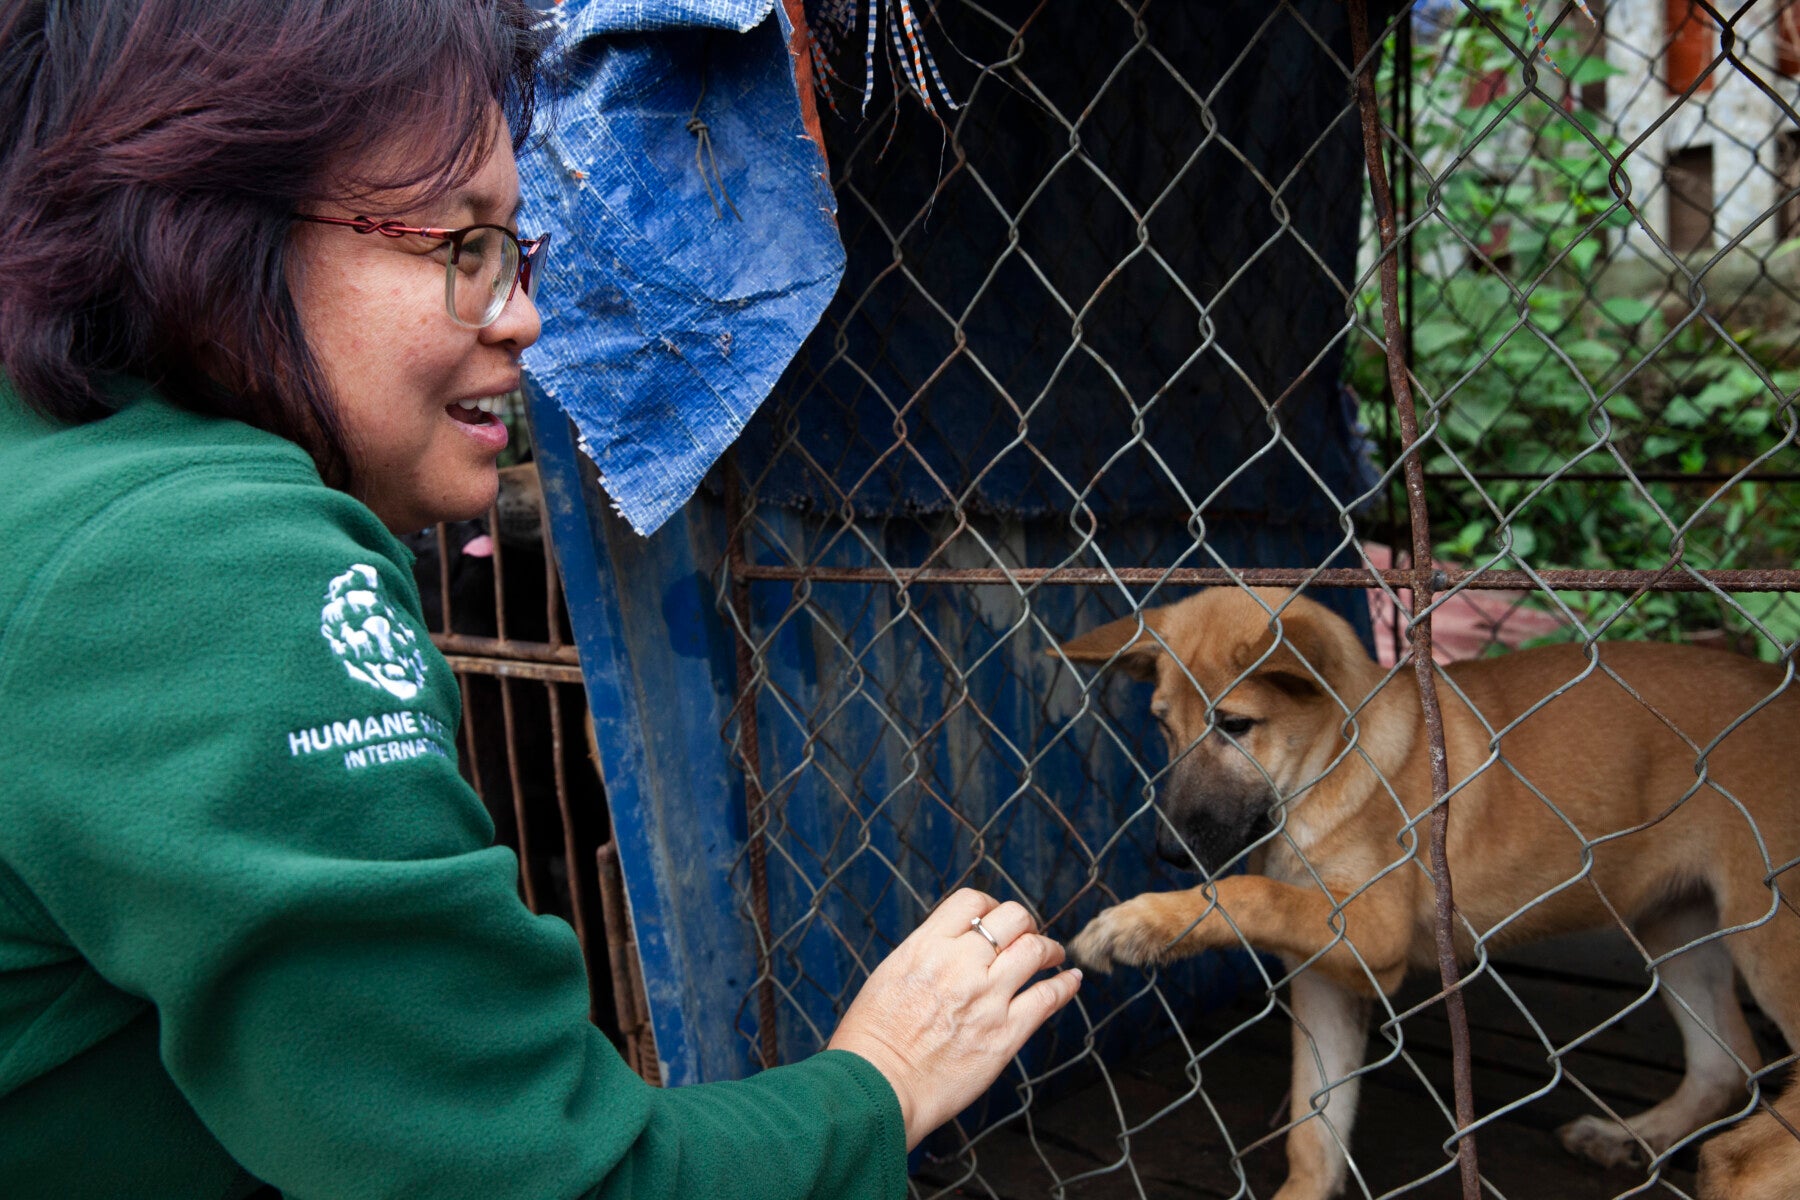 Dog slaughterhouse and restaurant in Viet Nam that had killed thousands of  animals in recent years closes in country's first Models for Change program  to end the dog meat trade - Humane